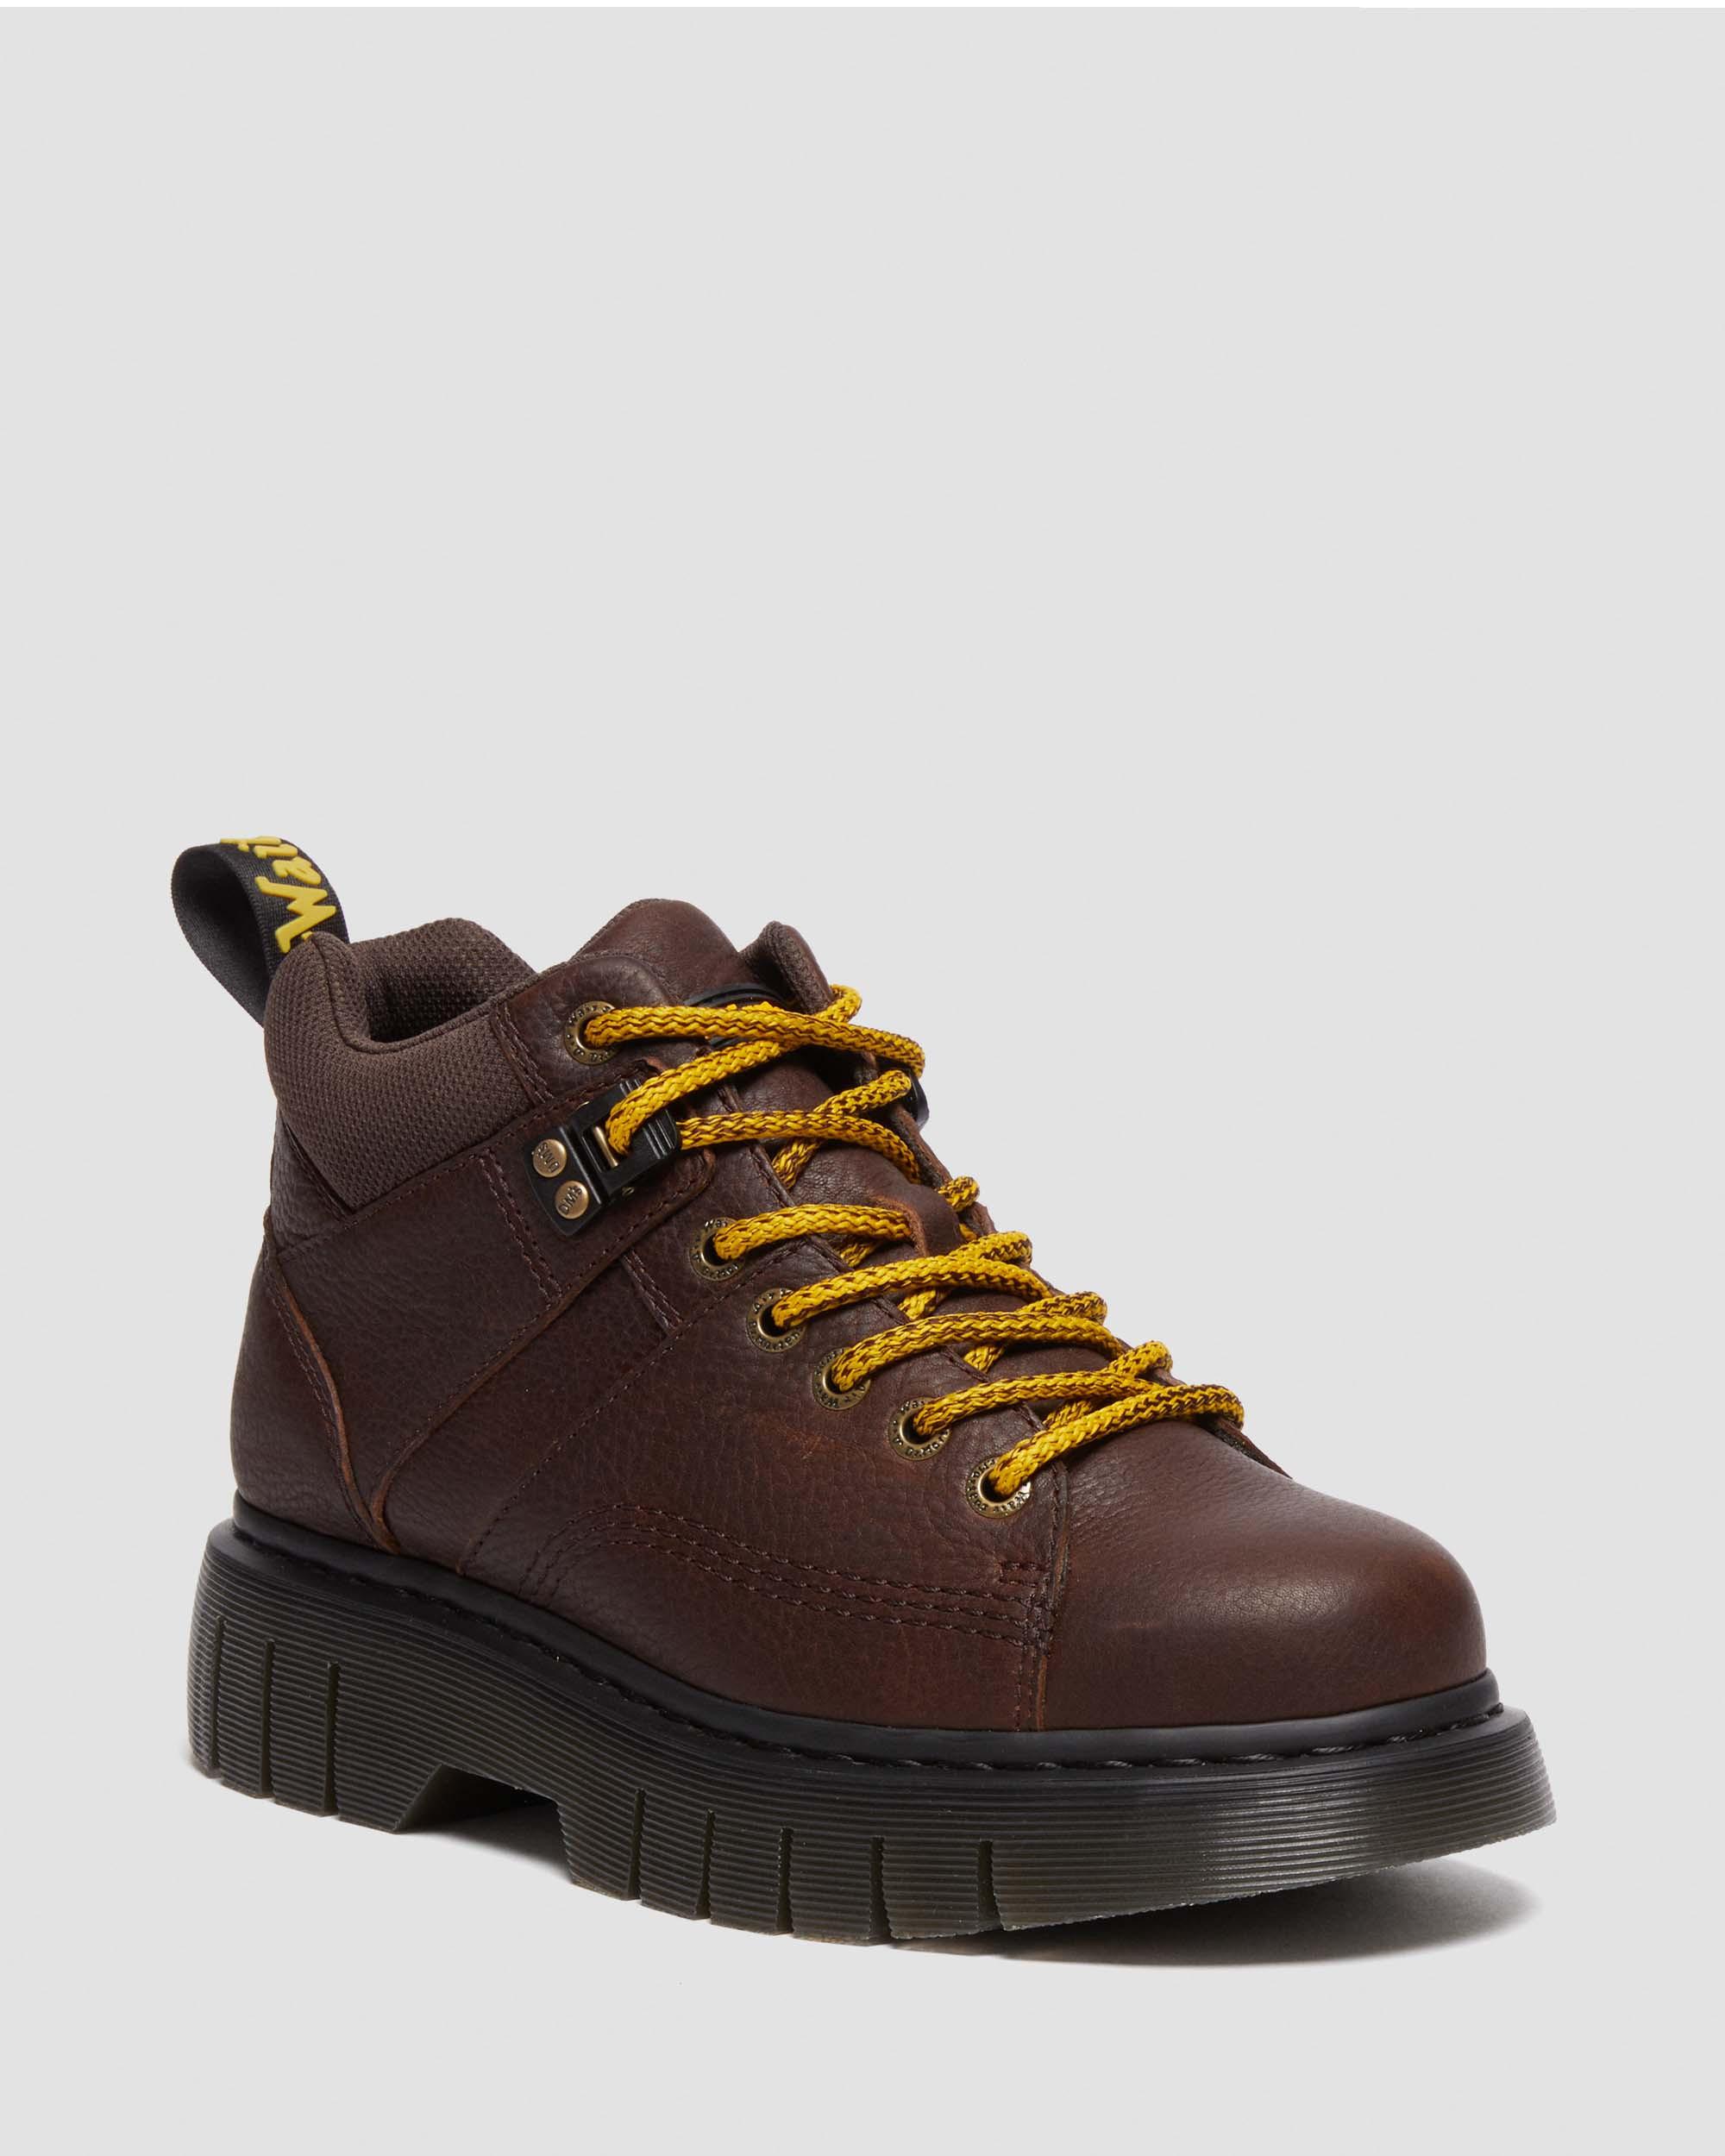 Woodard Leather Lace Up Ankle Boots Dark BrownWoodard Leather Lace Up Ankle Boots Dr. Martens